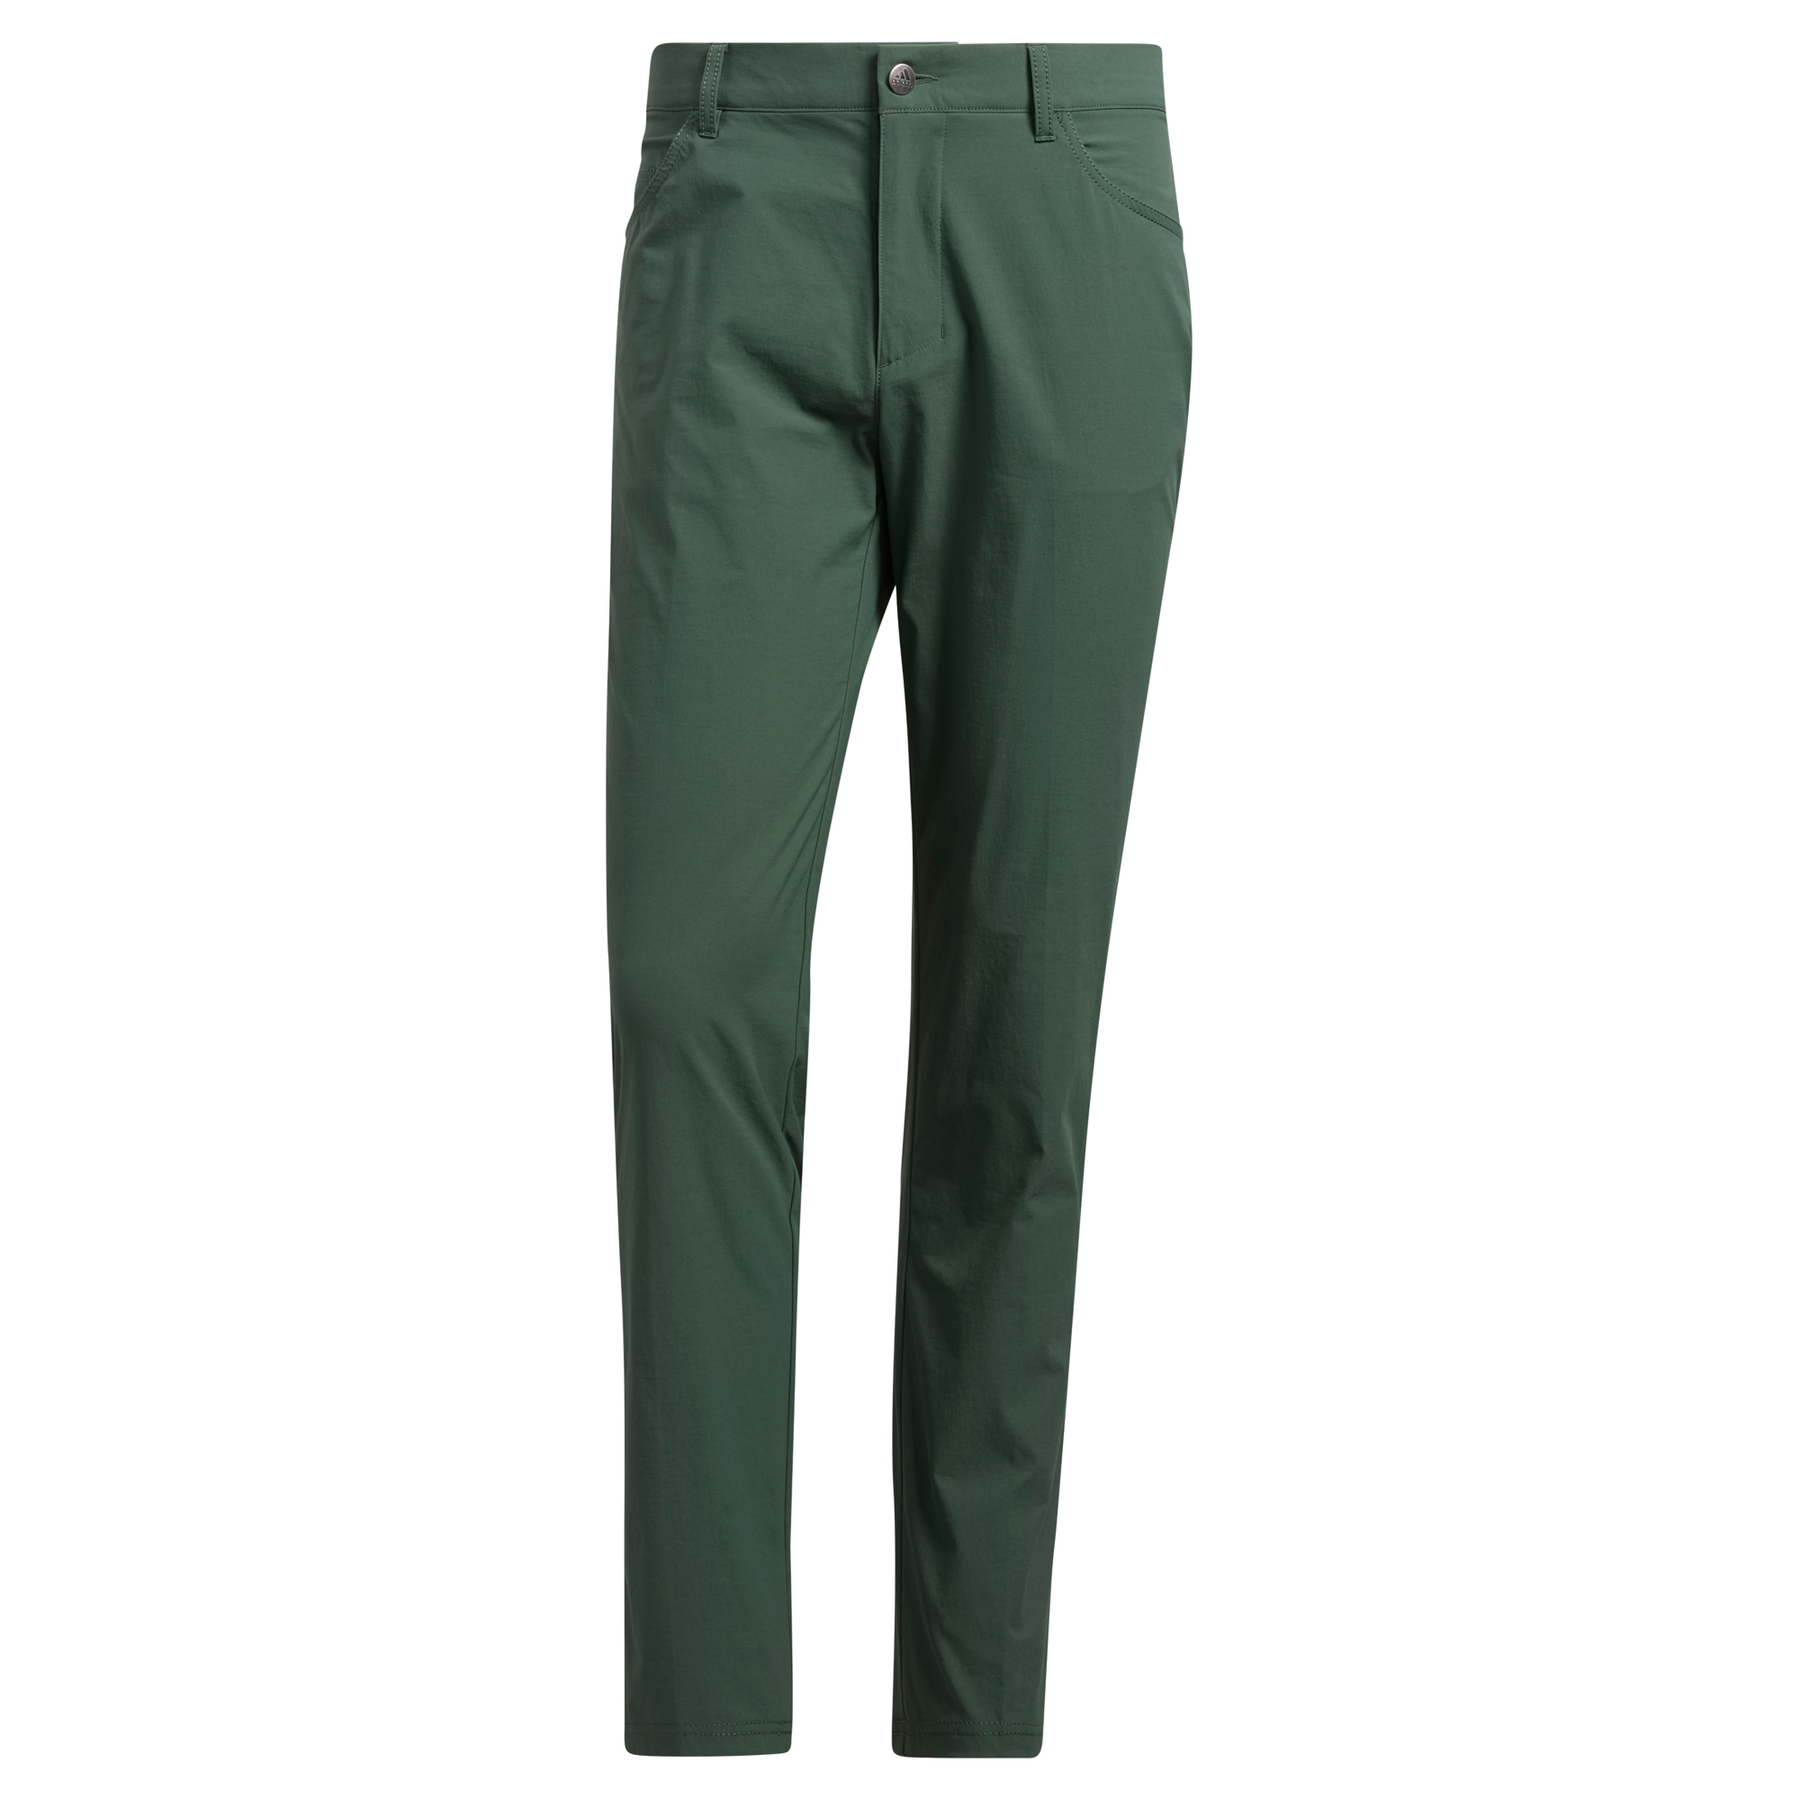 Adidas Ultimate Pant Tapered Green